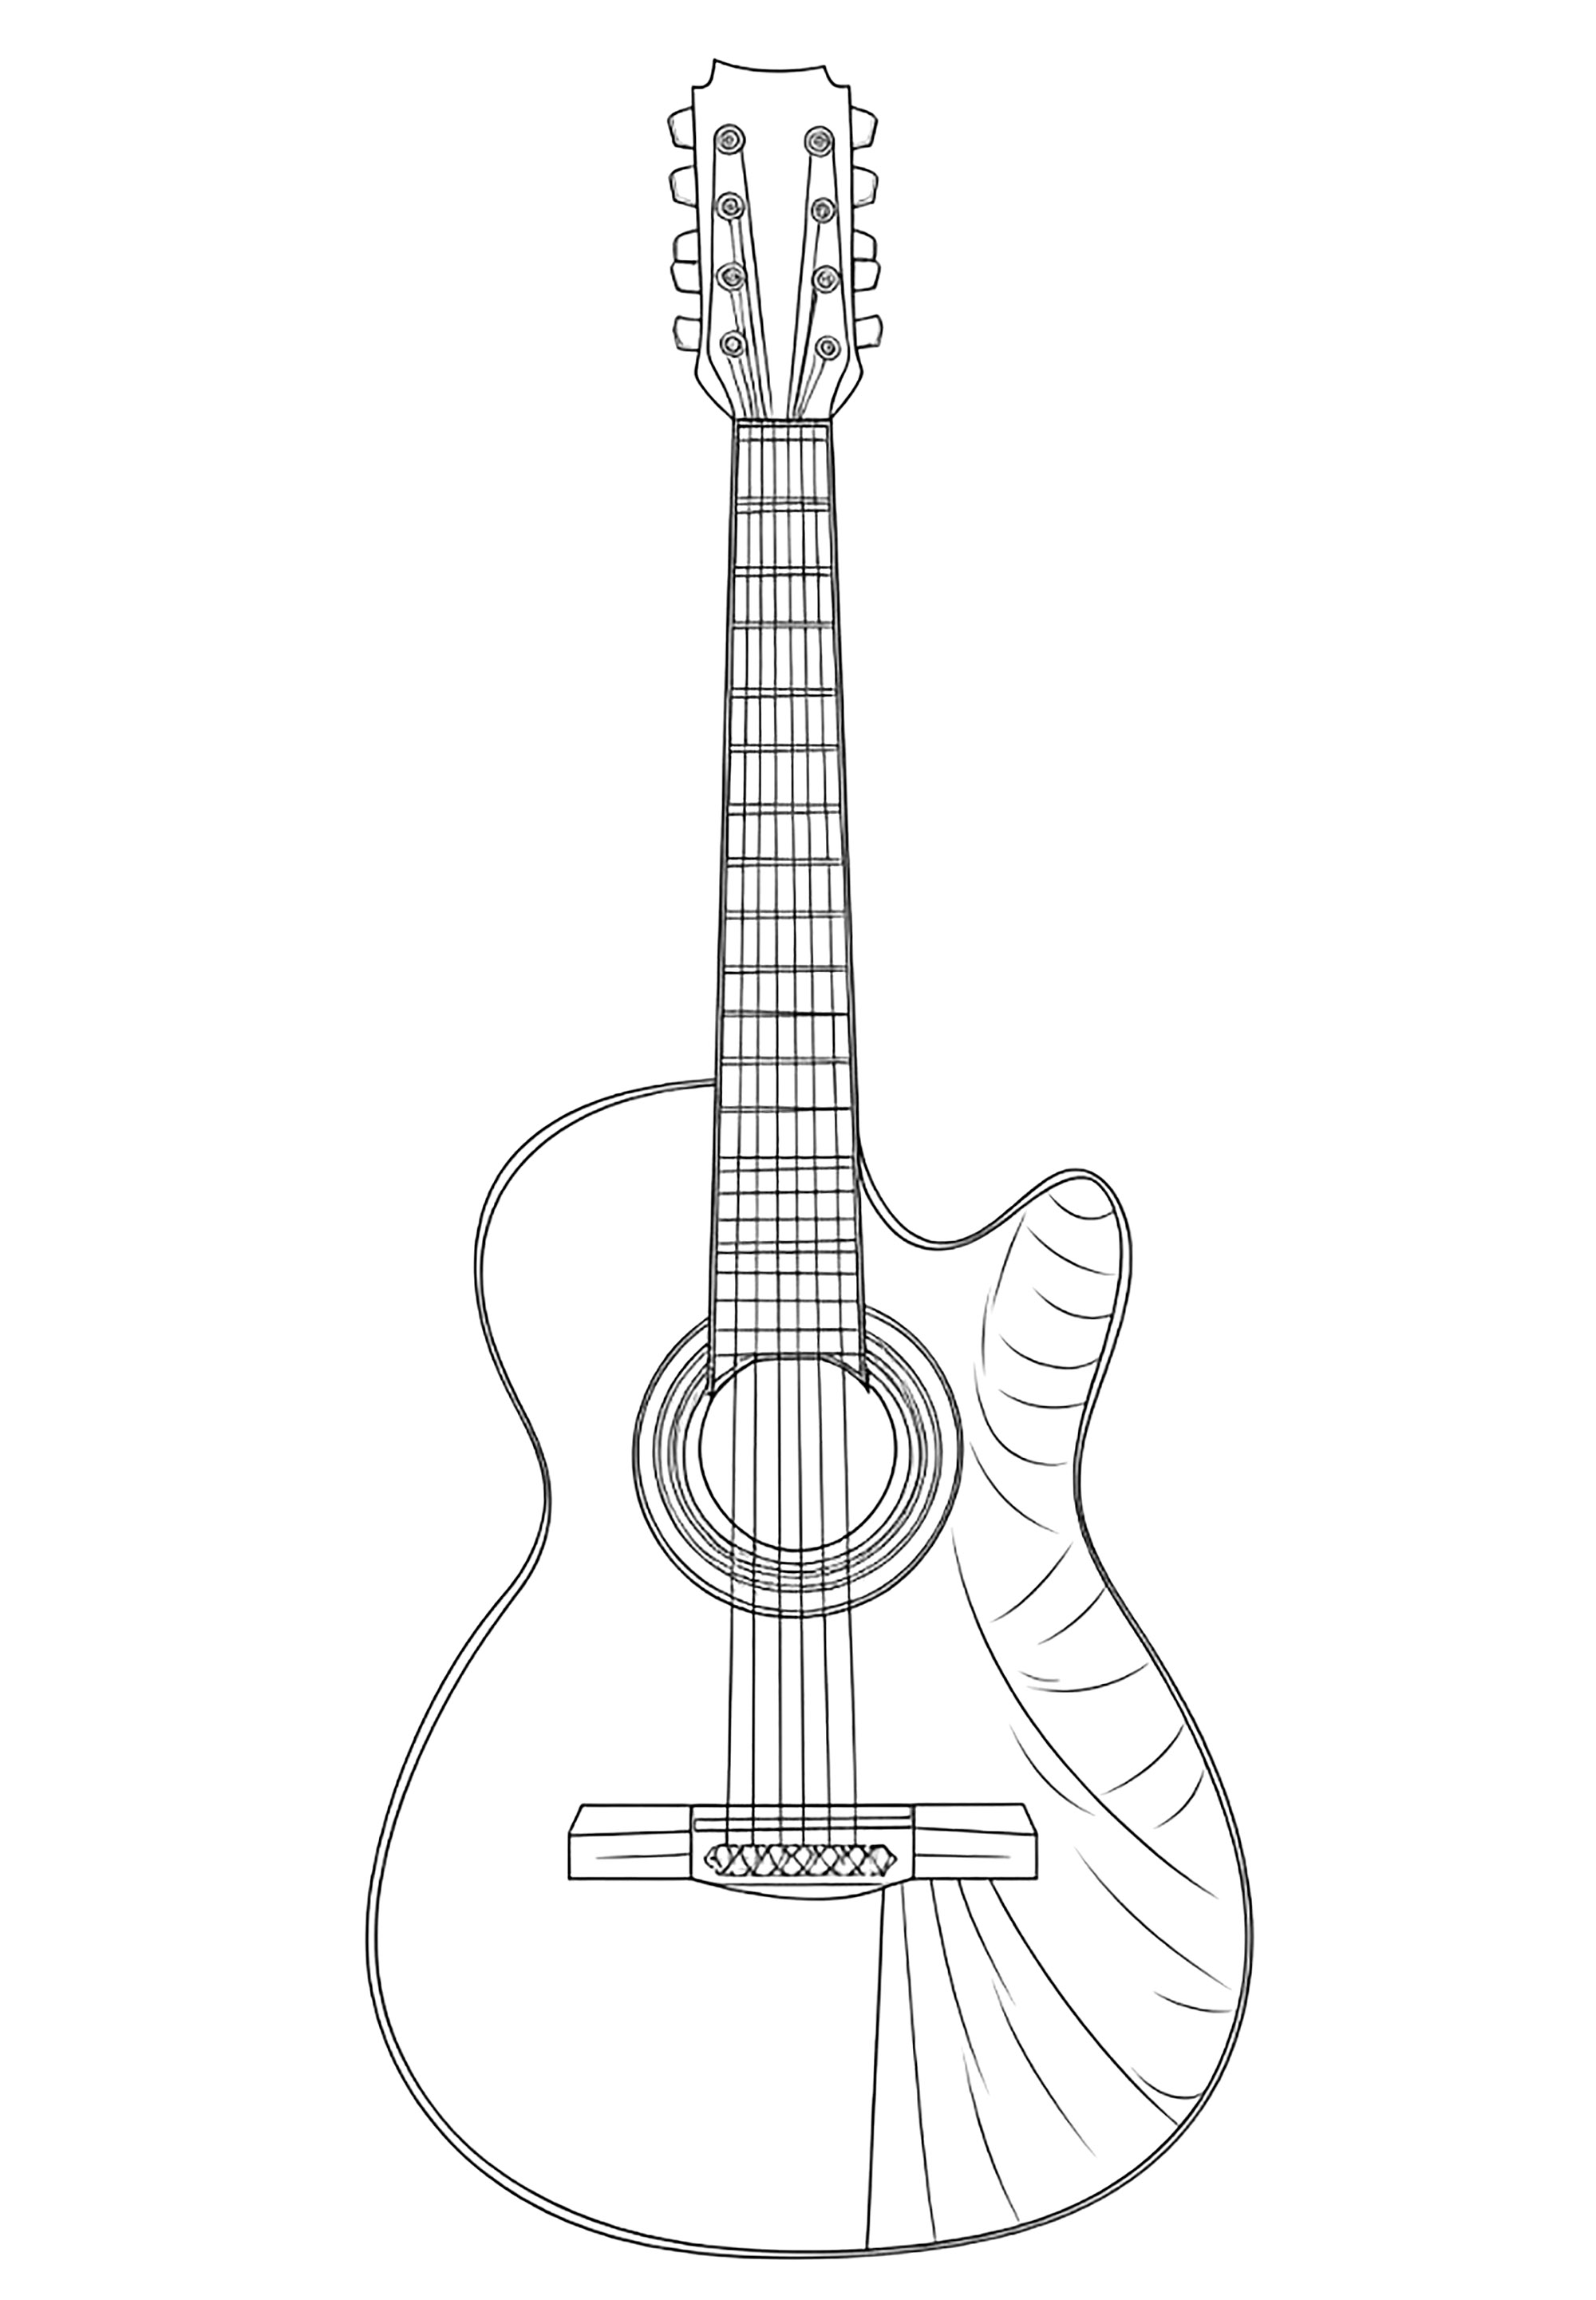 Coloring page of a Guitar